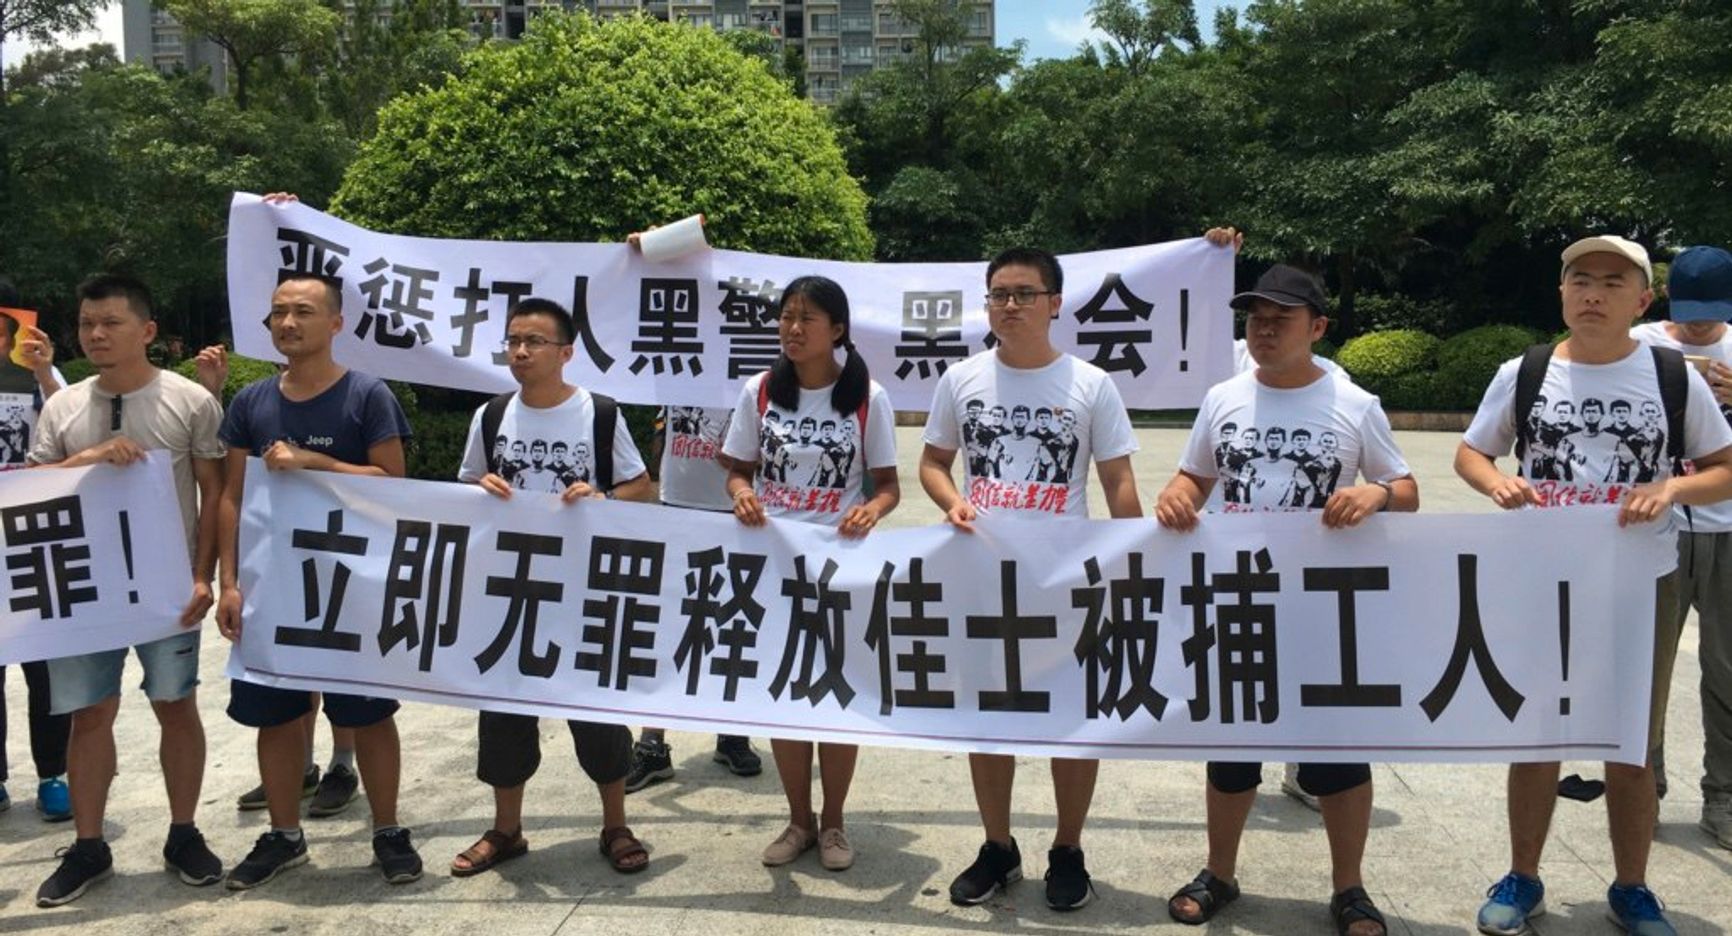 Demonstration in support of Jasic Technology workers, Shenzhen, 6 August 2018